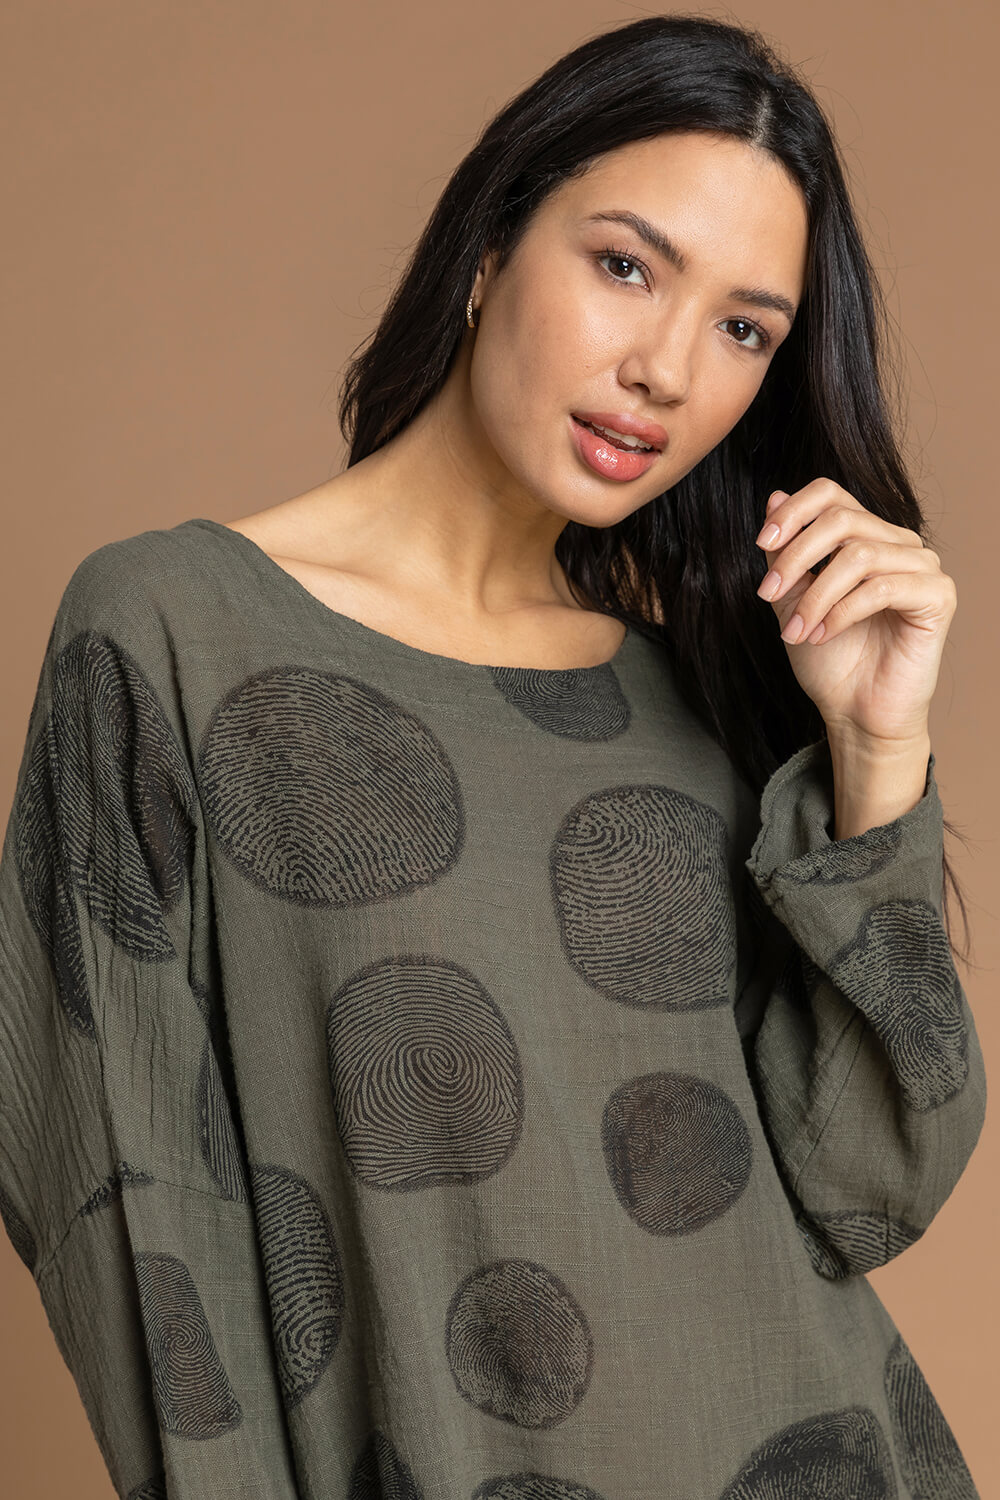 KHAKI Spot Print Top With Necklace, Image 4 of 4